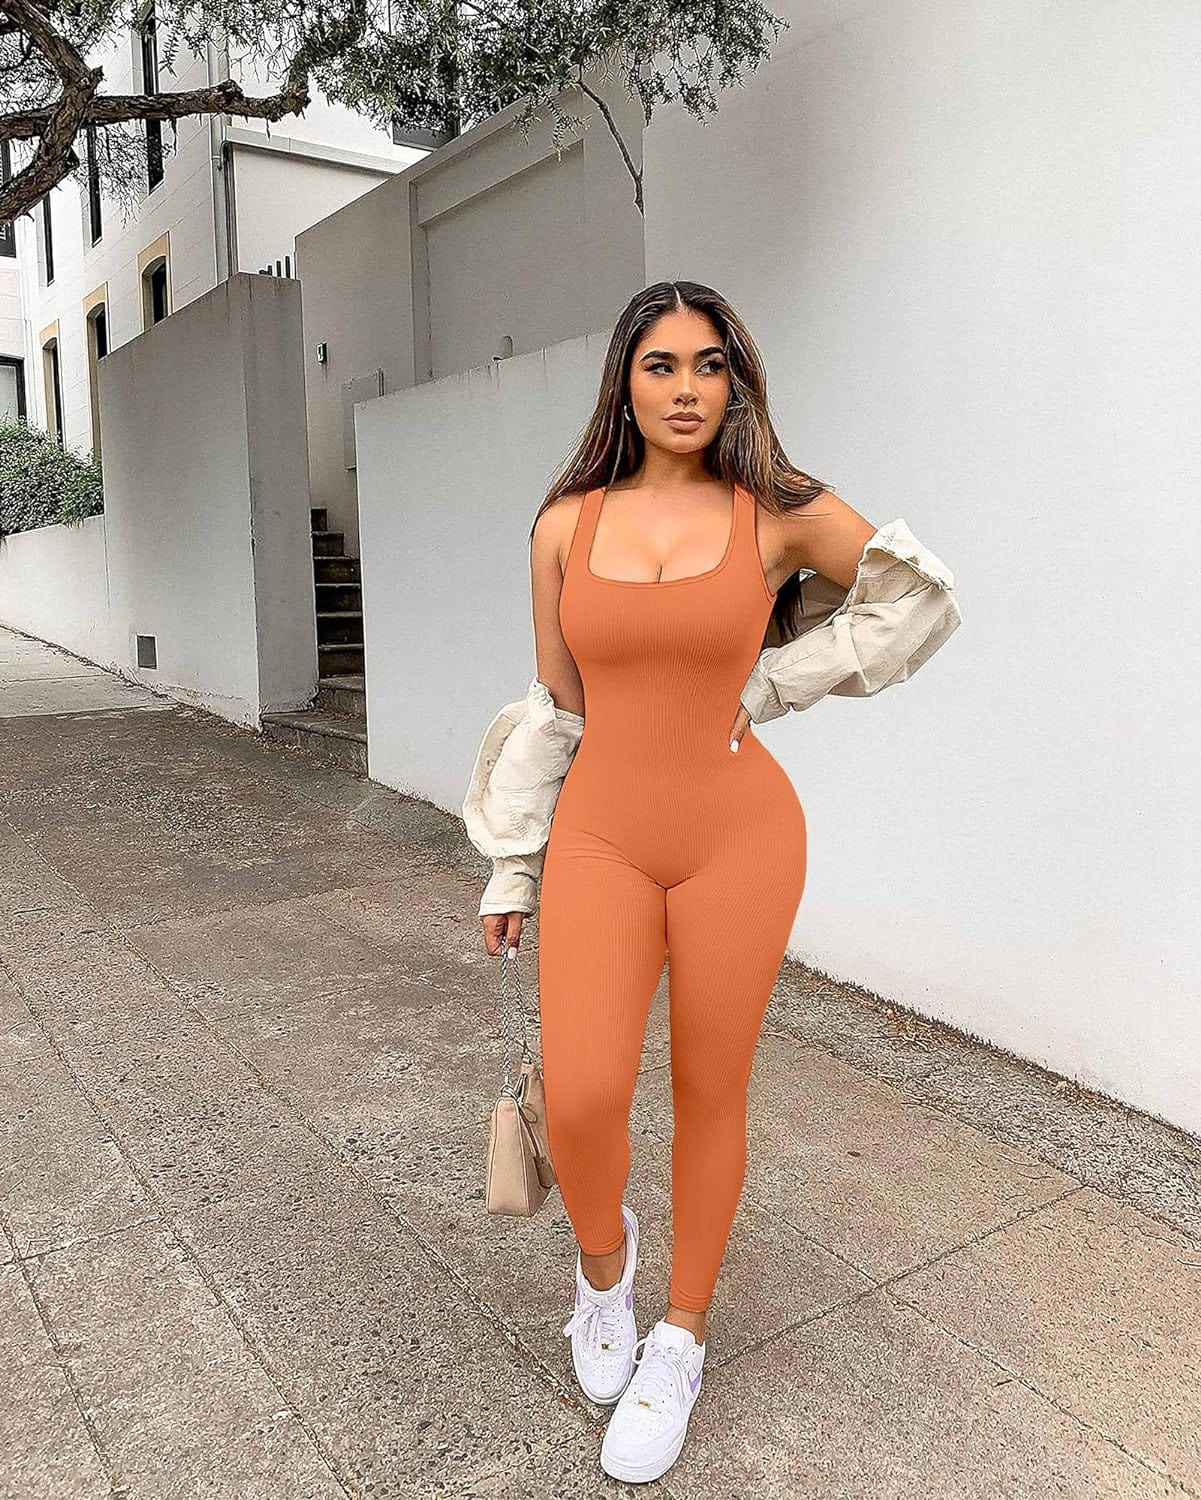 YIOIOIO Women Workout Seamless Jumpsuit Yoga Ribbed Bodycon One Piece Square Neck Leggings Romper. Back to results Amazon